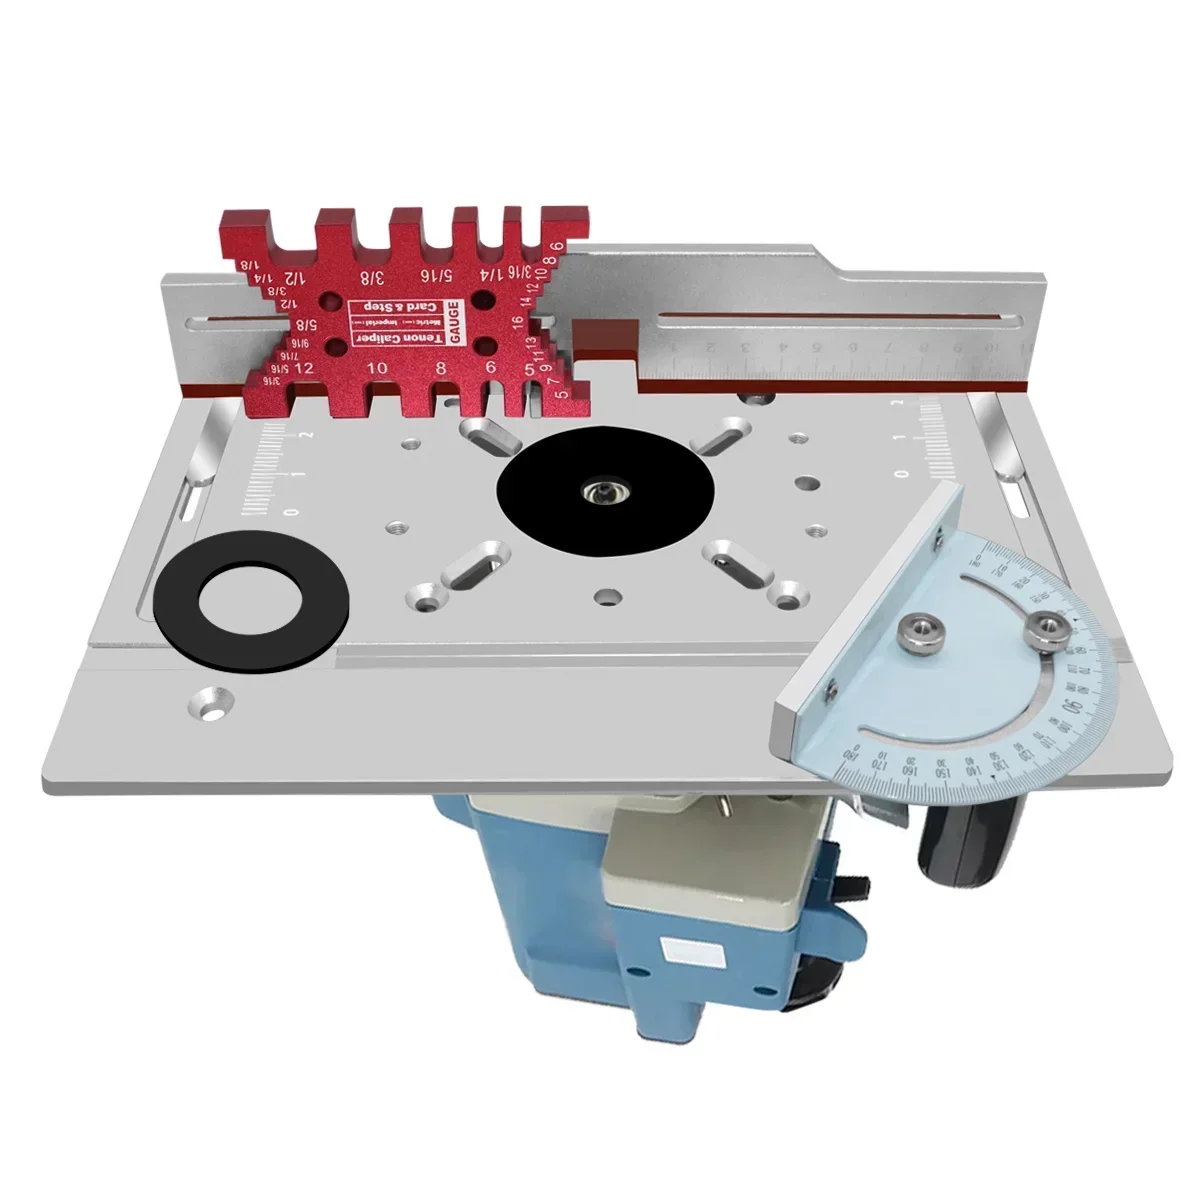 

Plate Milling With Lift Router Table Miter Guide With -aluminium Board Tenoning Router Fence Kit Insert Gauge Wood Electric Flip